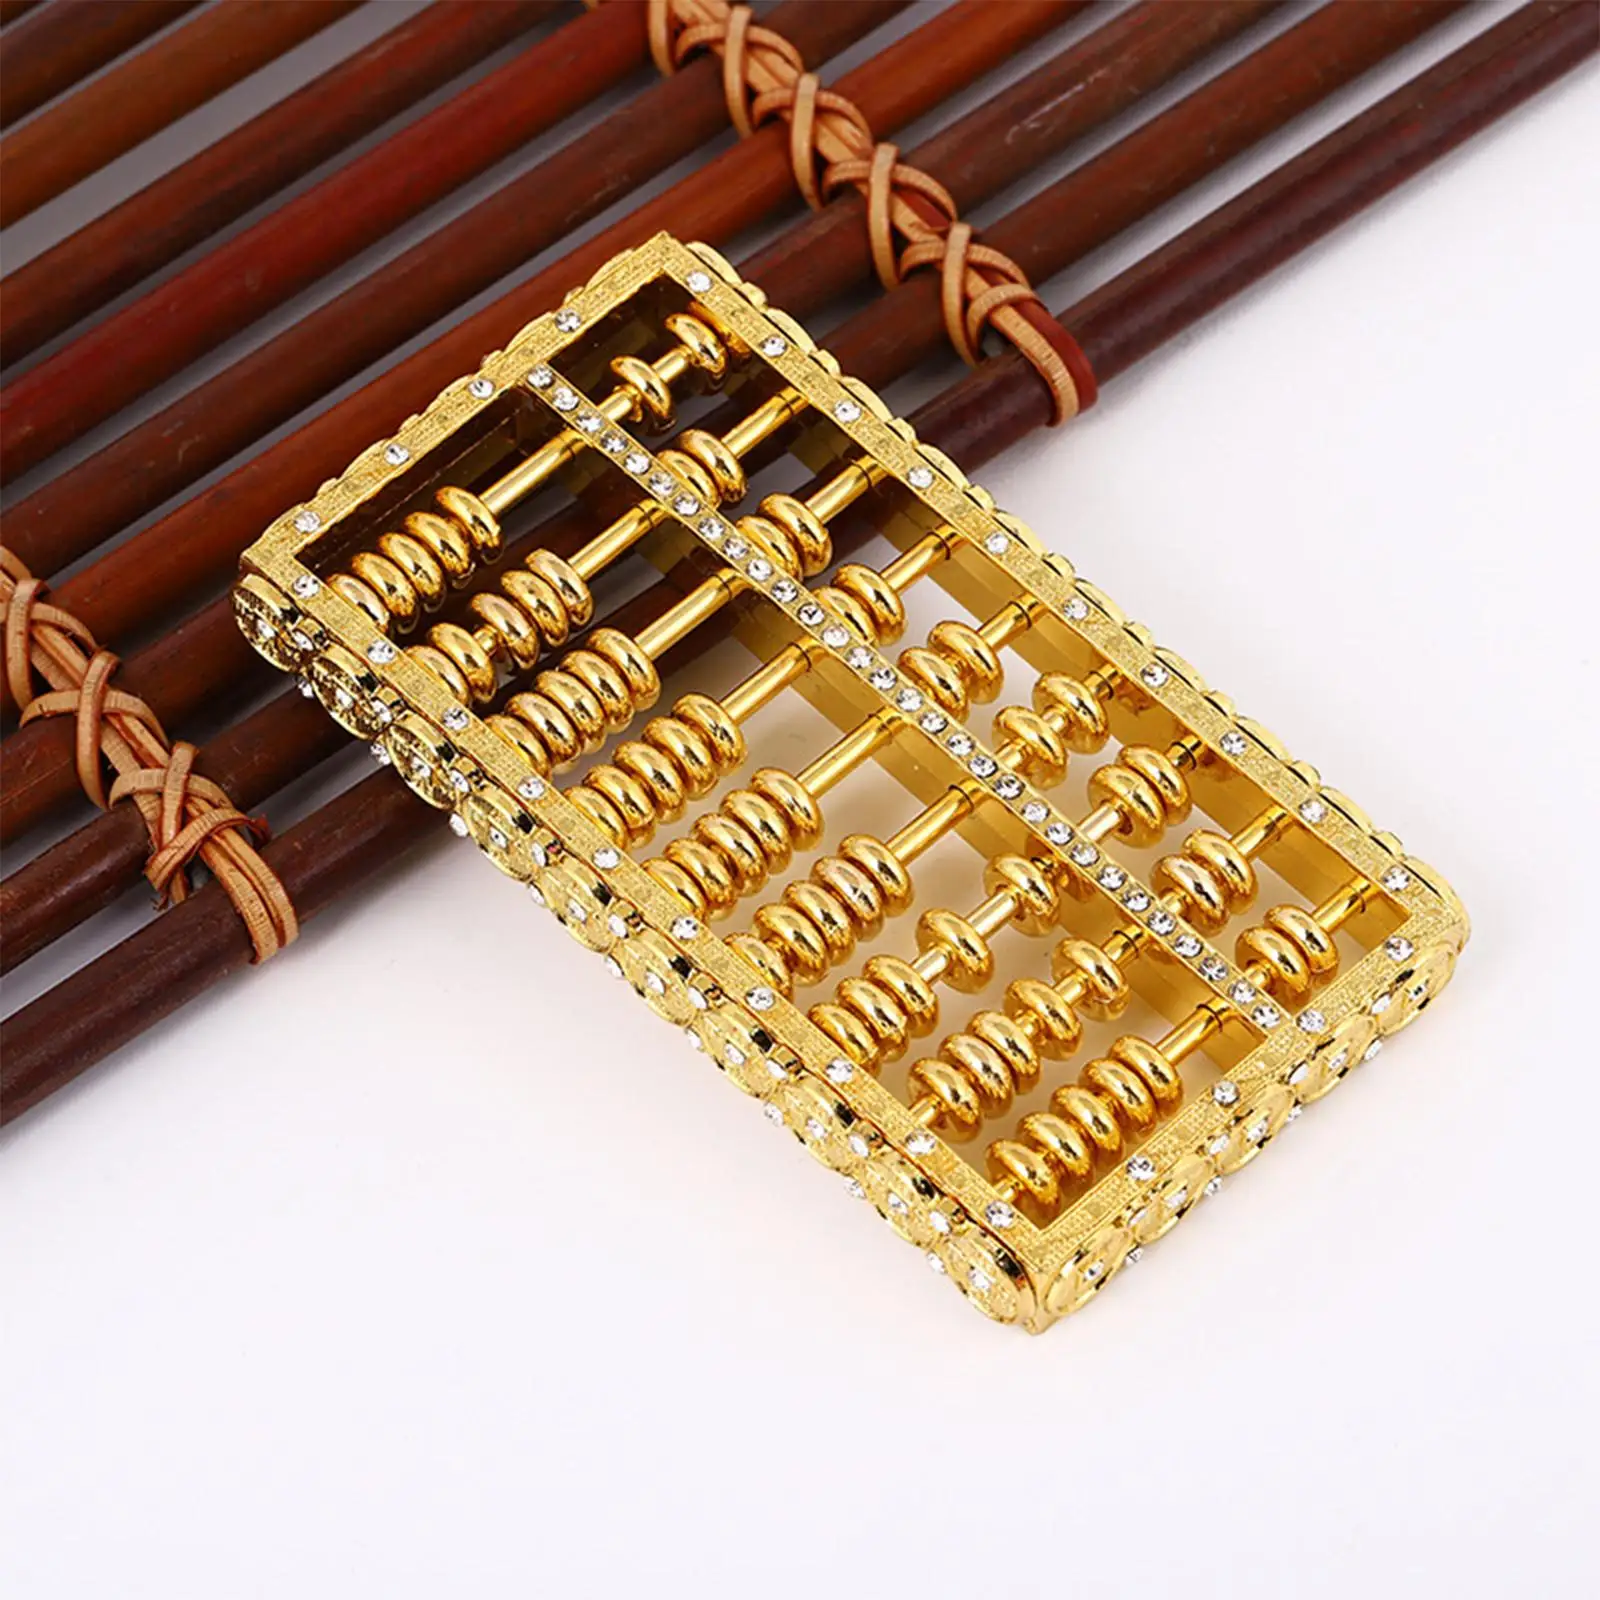 Fashion Abacus Decoration Ancient China Calculate Beads Toy Alloy Mini Counting Bead Abacus for Gift Desktop Ornaments Men Women